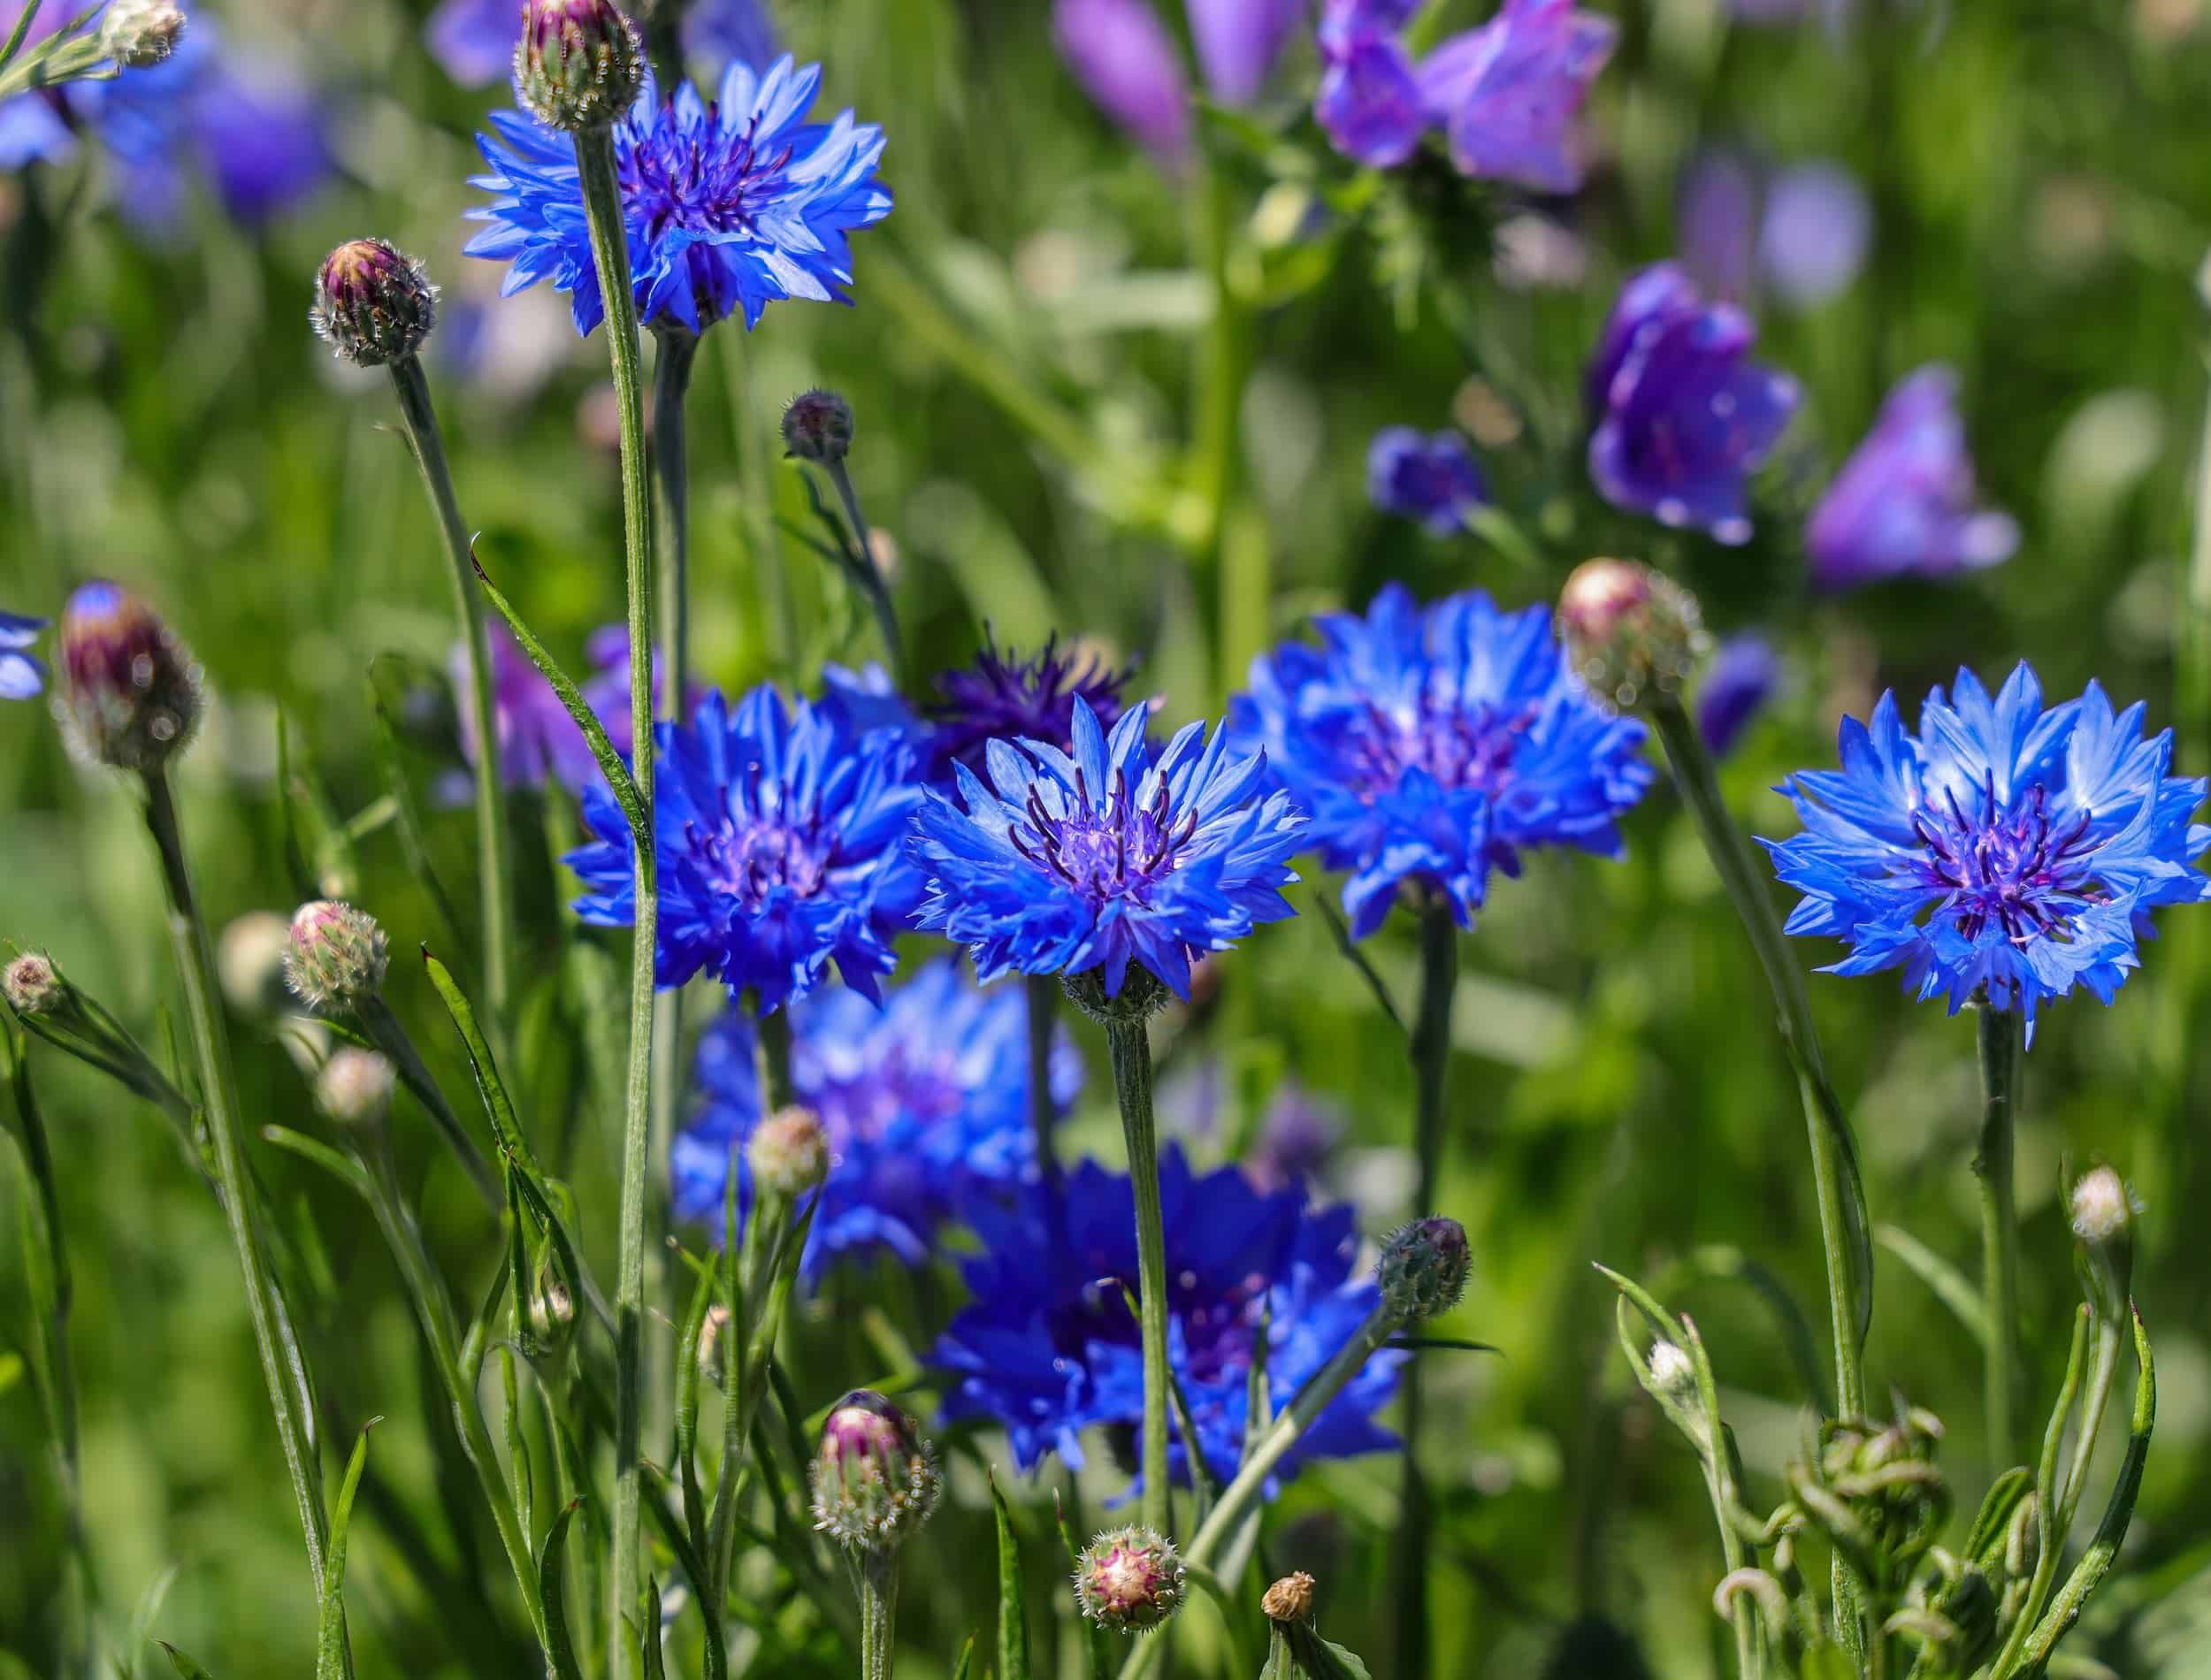 Centaurea cyanus, commonly known as cornflower or bachelor's button, is an annual flowering plant in the family Asteraceae native to Europe.